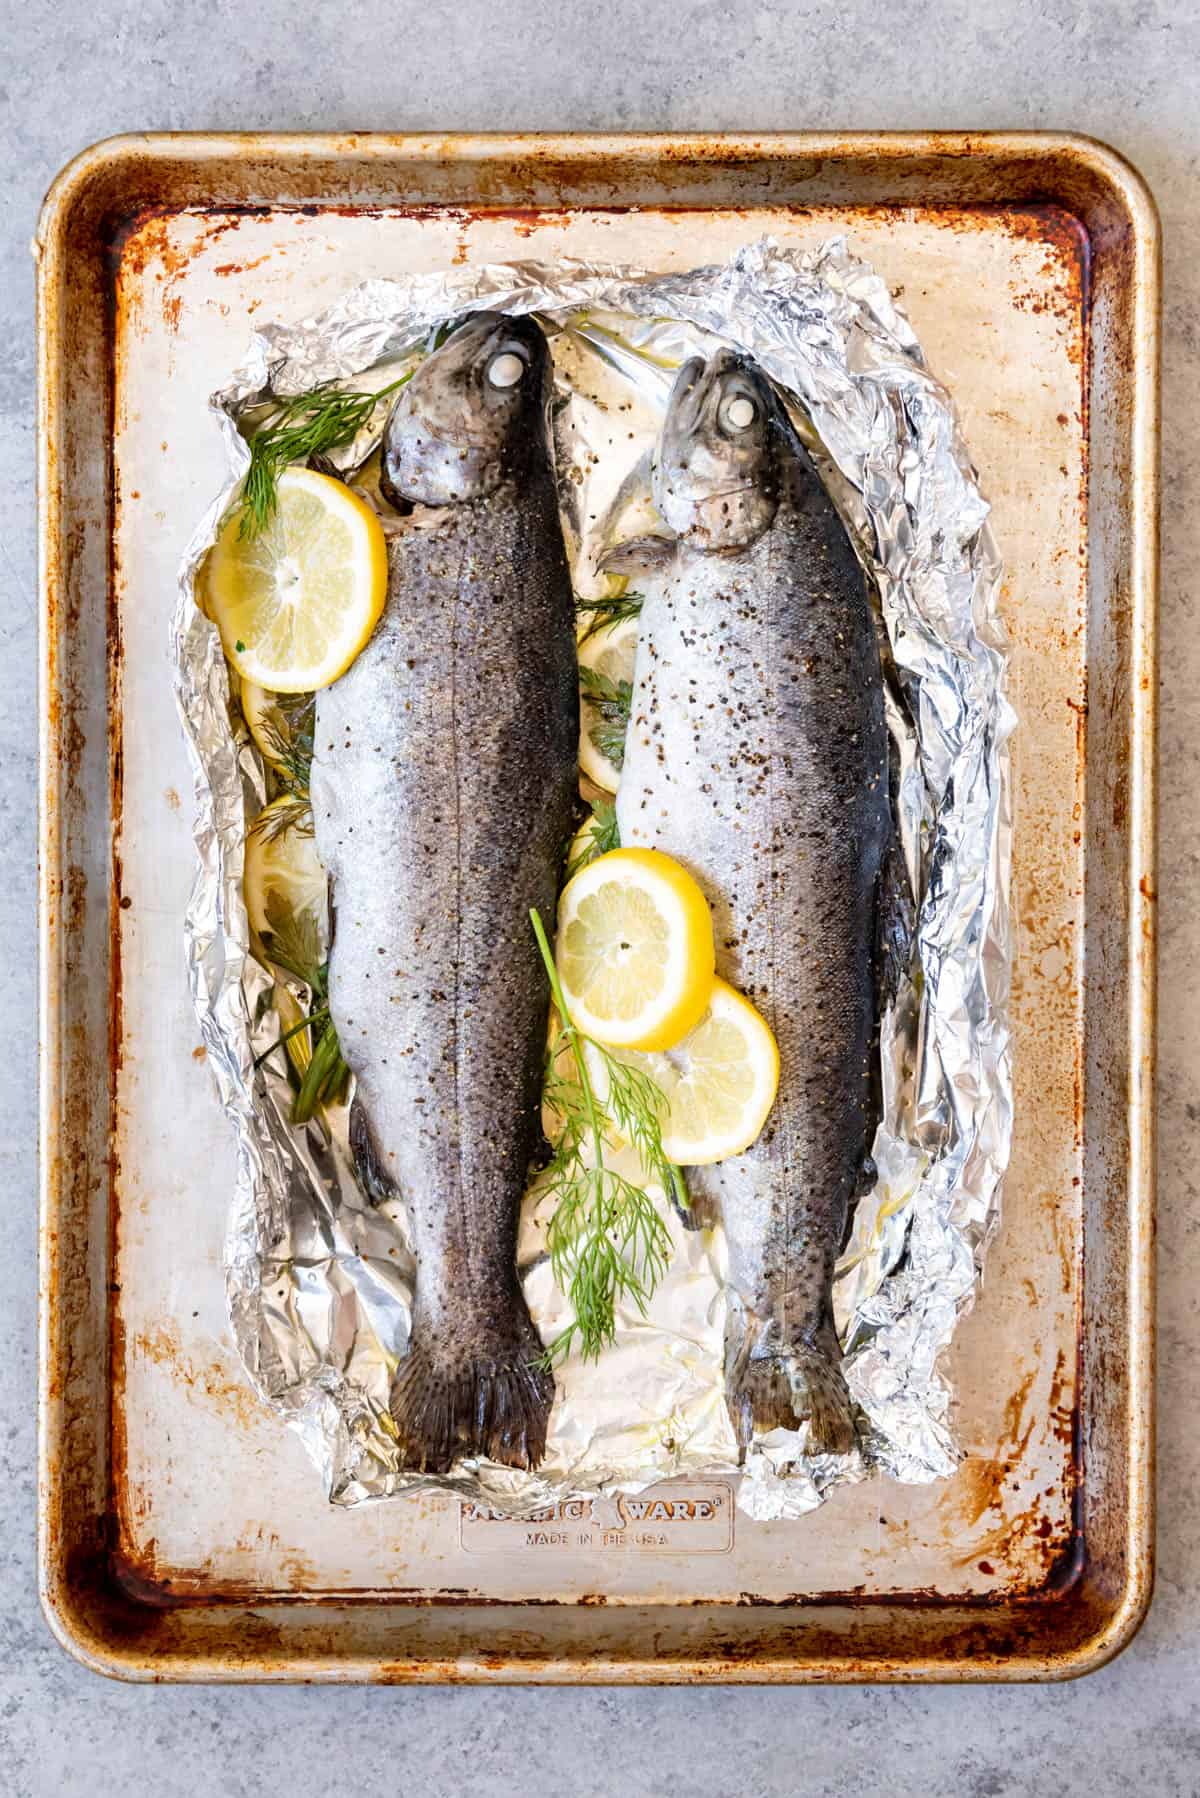 An image of two whole rainbow trout on foil with sliced lemon and herbs.